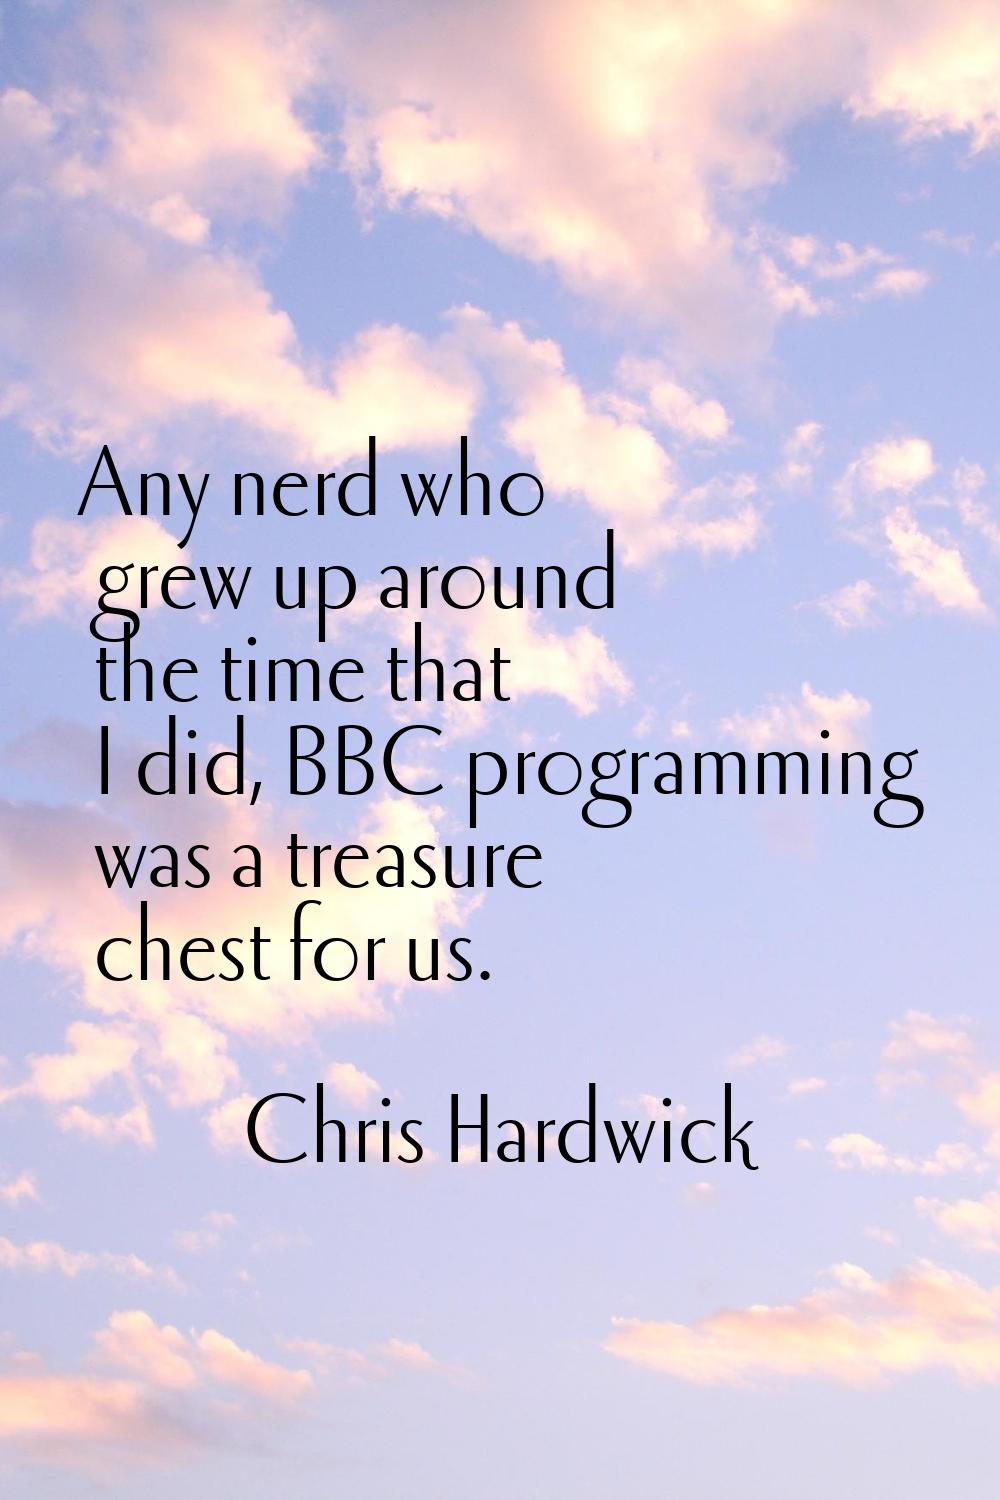 Any nerd who grew up around the time that I did, BBC programming was a treasure chest for us.